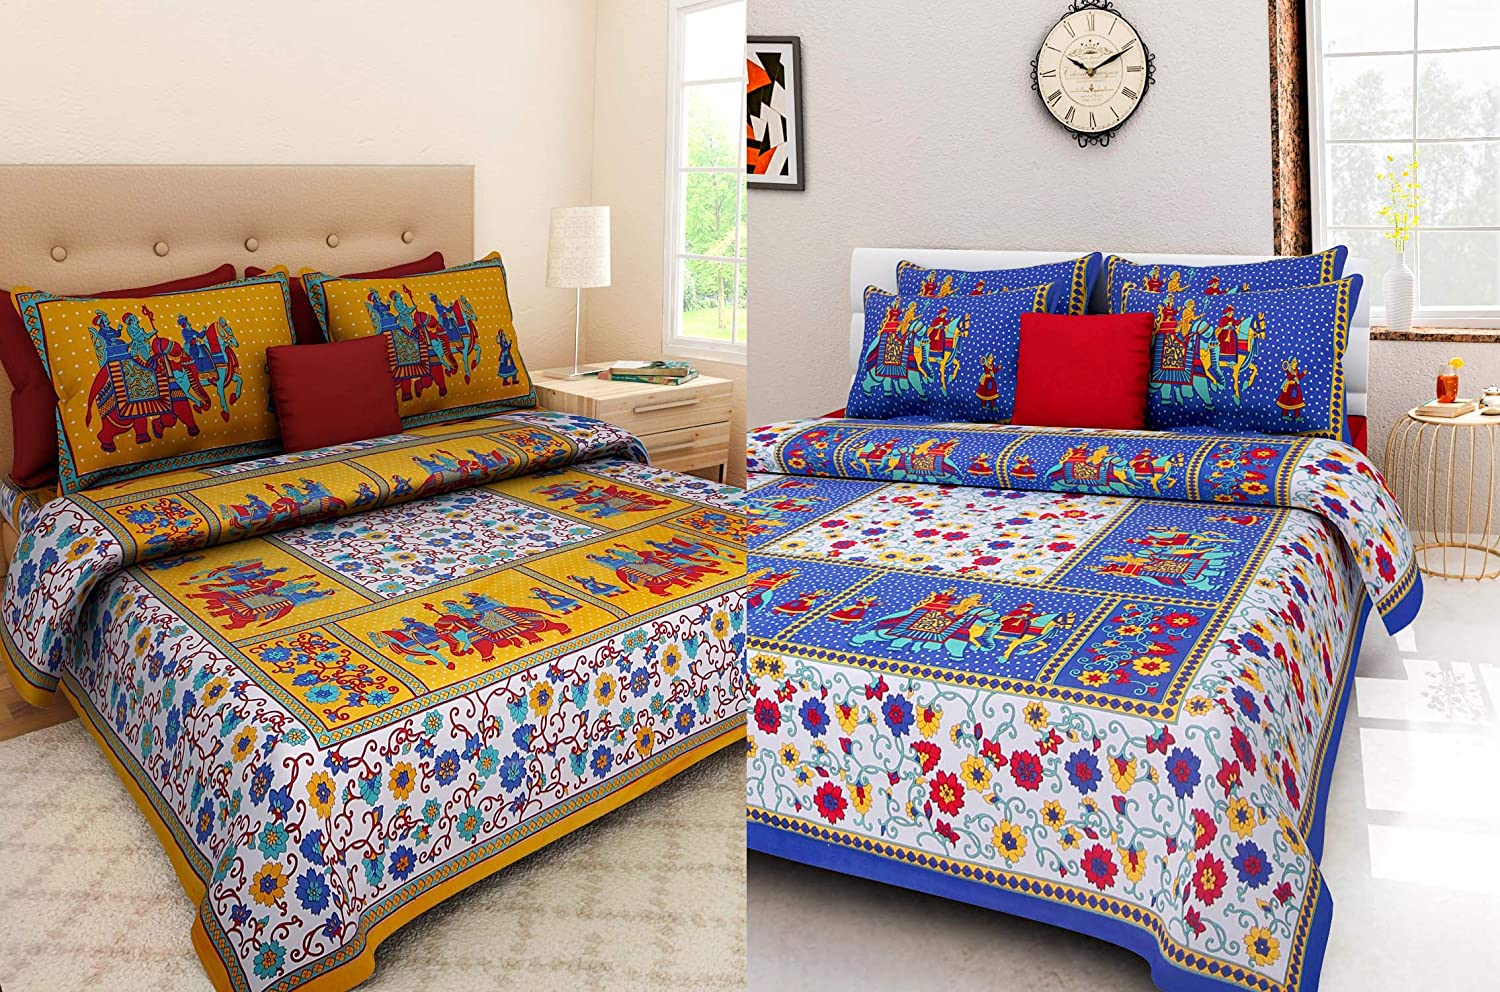 Cotton  bedsheets Combo of 2 Double Bed Sheets With Pillow Covers 